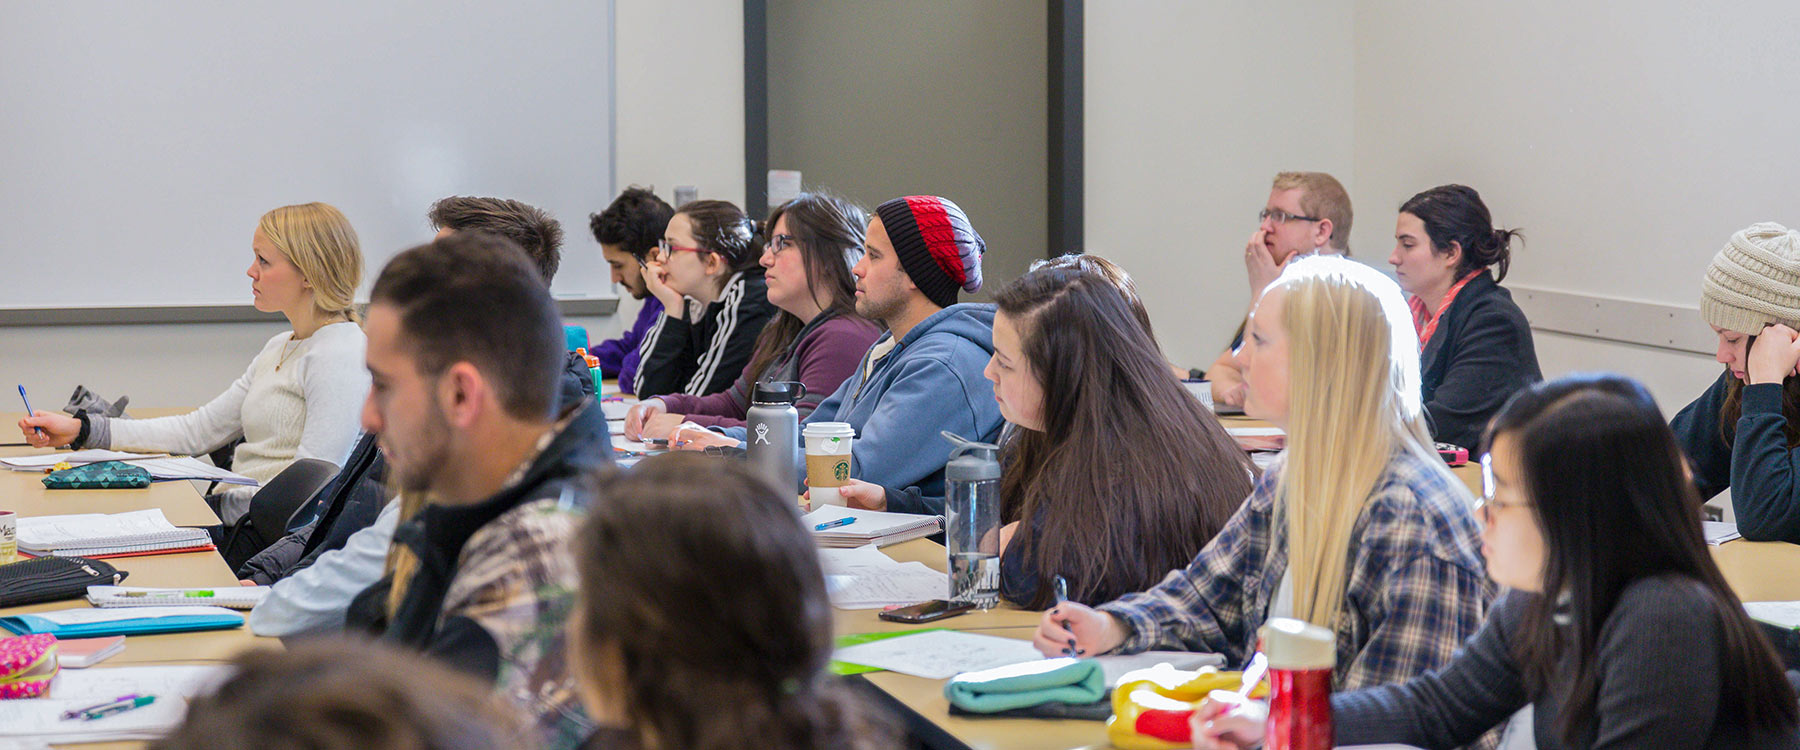 A group of students sit in rows in a full classroom listening and taking notes during a lecture.